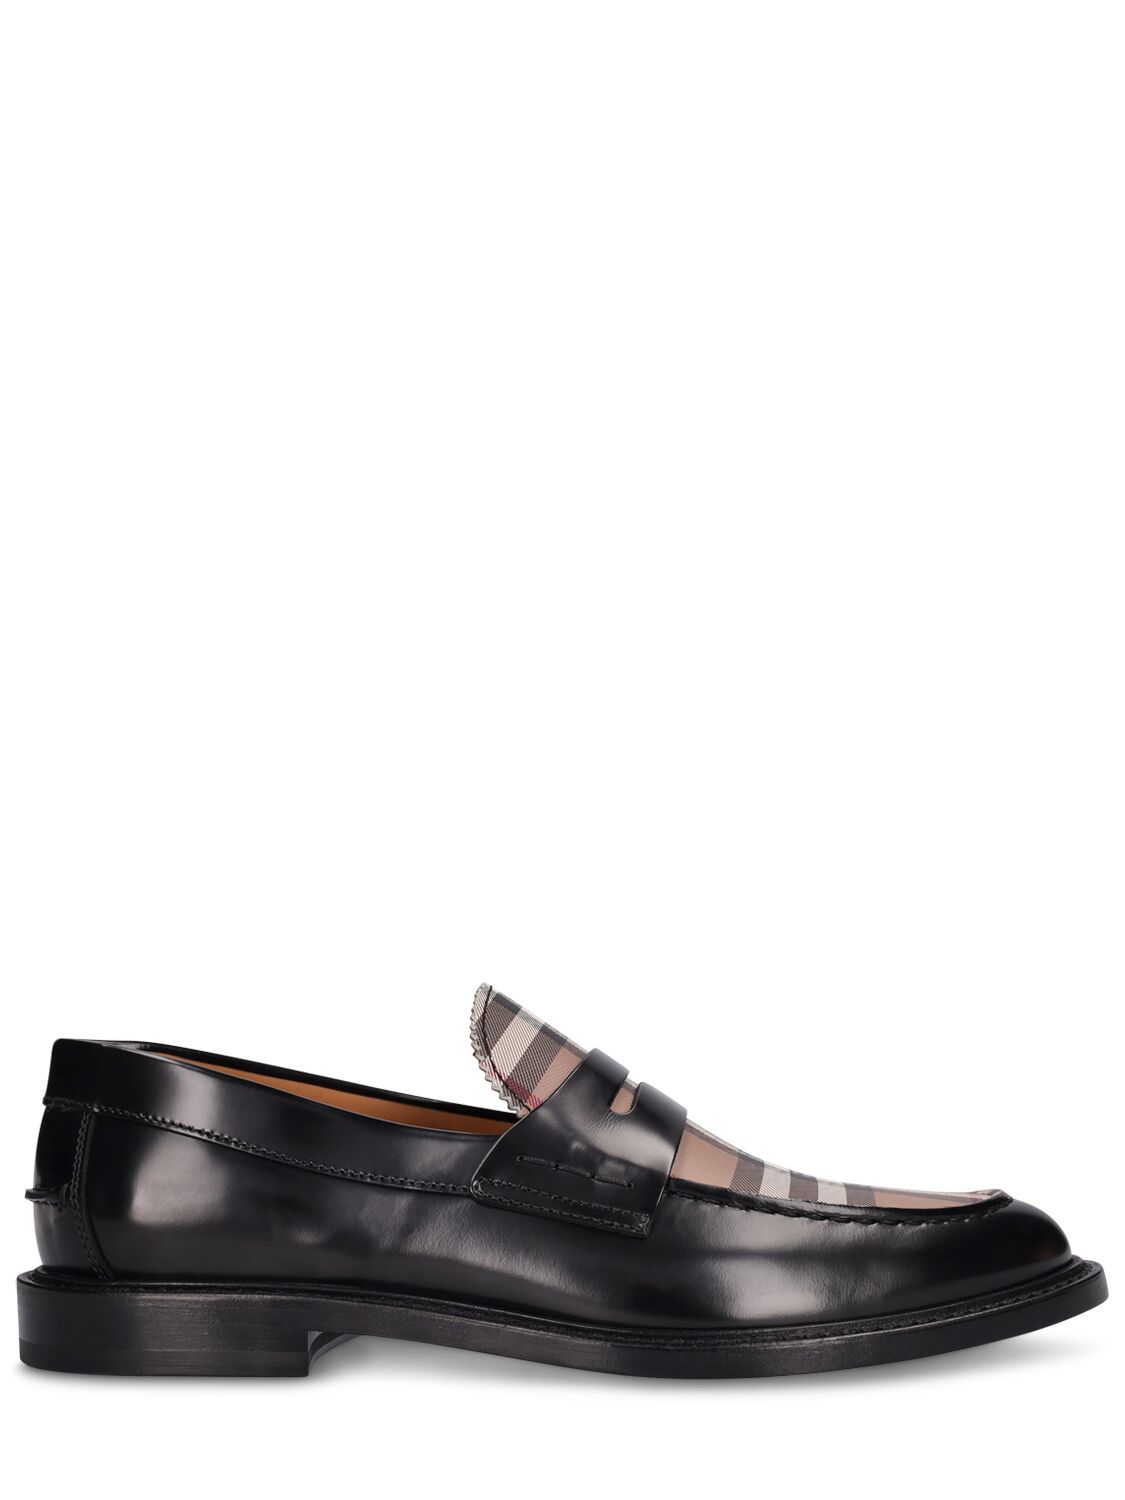 Burberry Check Leather Formal Loafers In Black